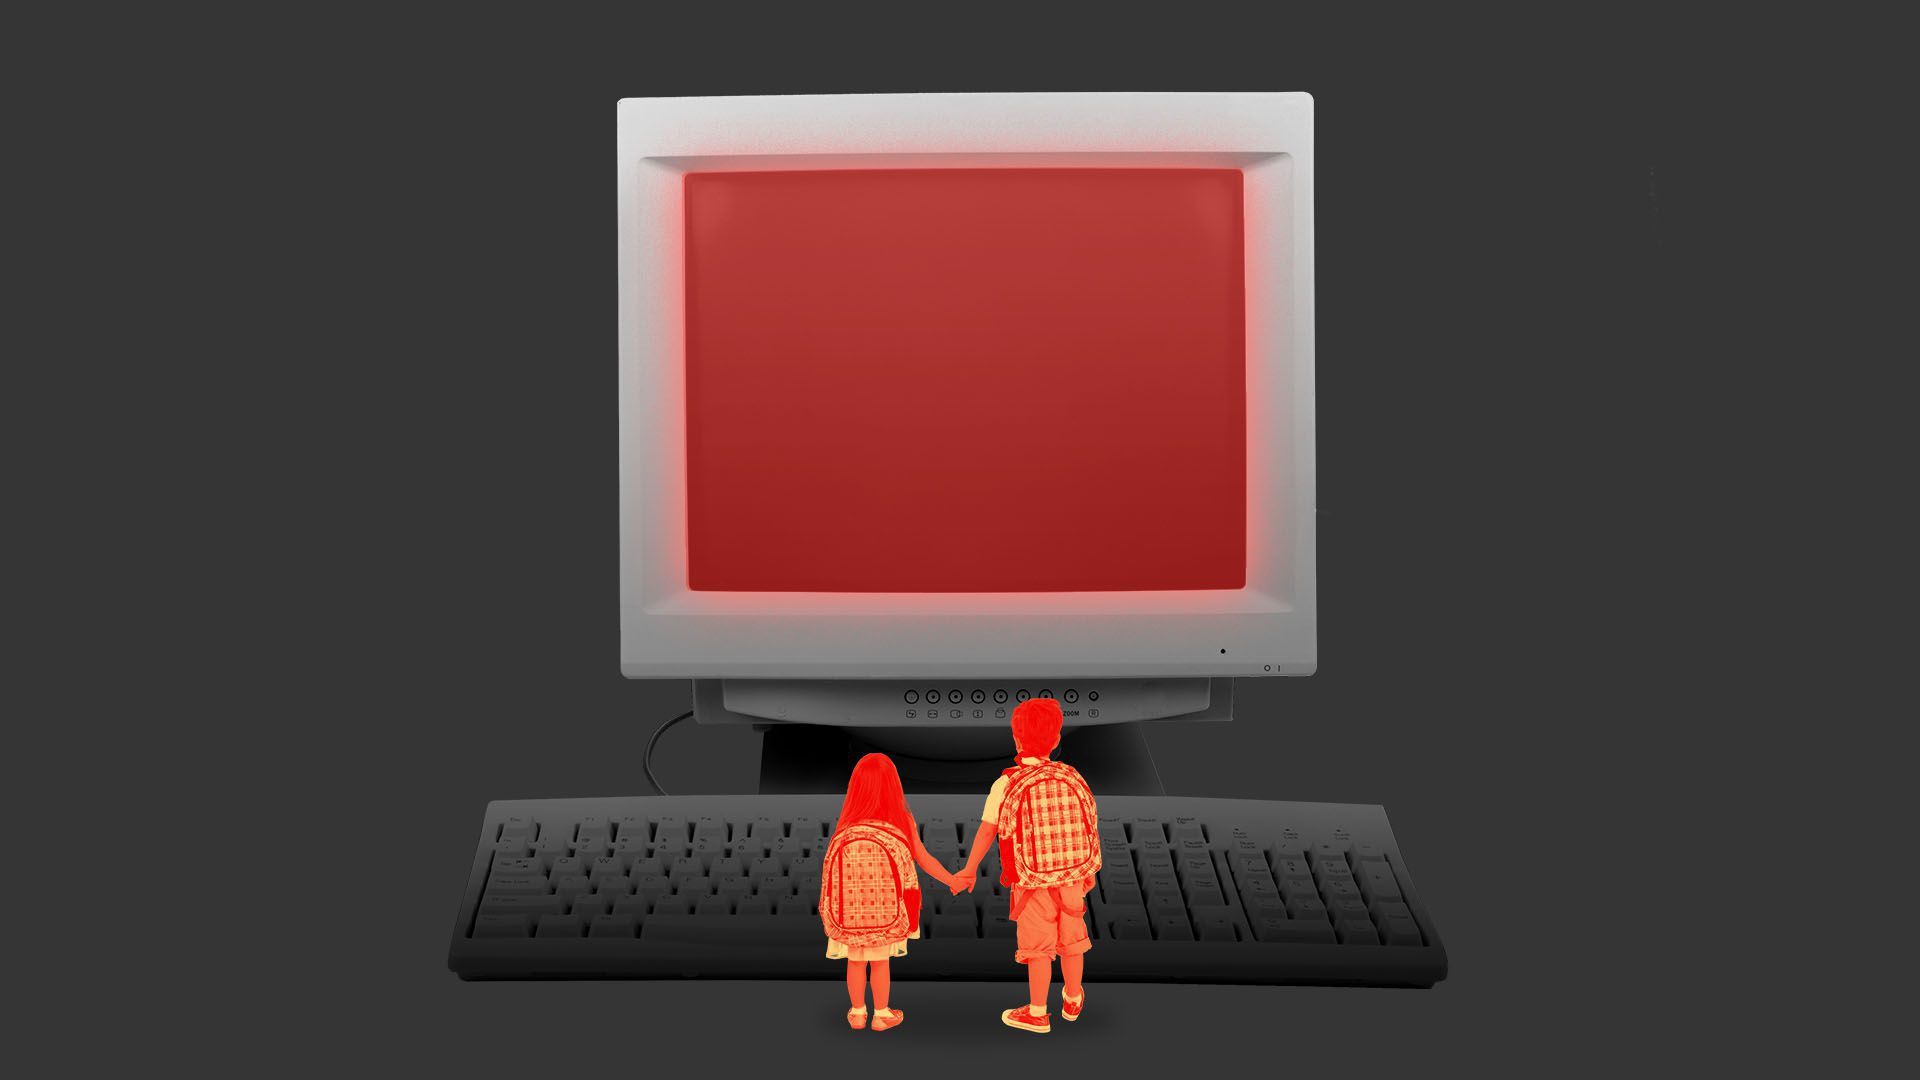 An illustration of two small kids standing in front of a giant computer with a glowing red screen.